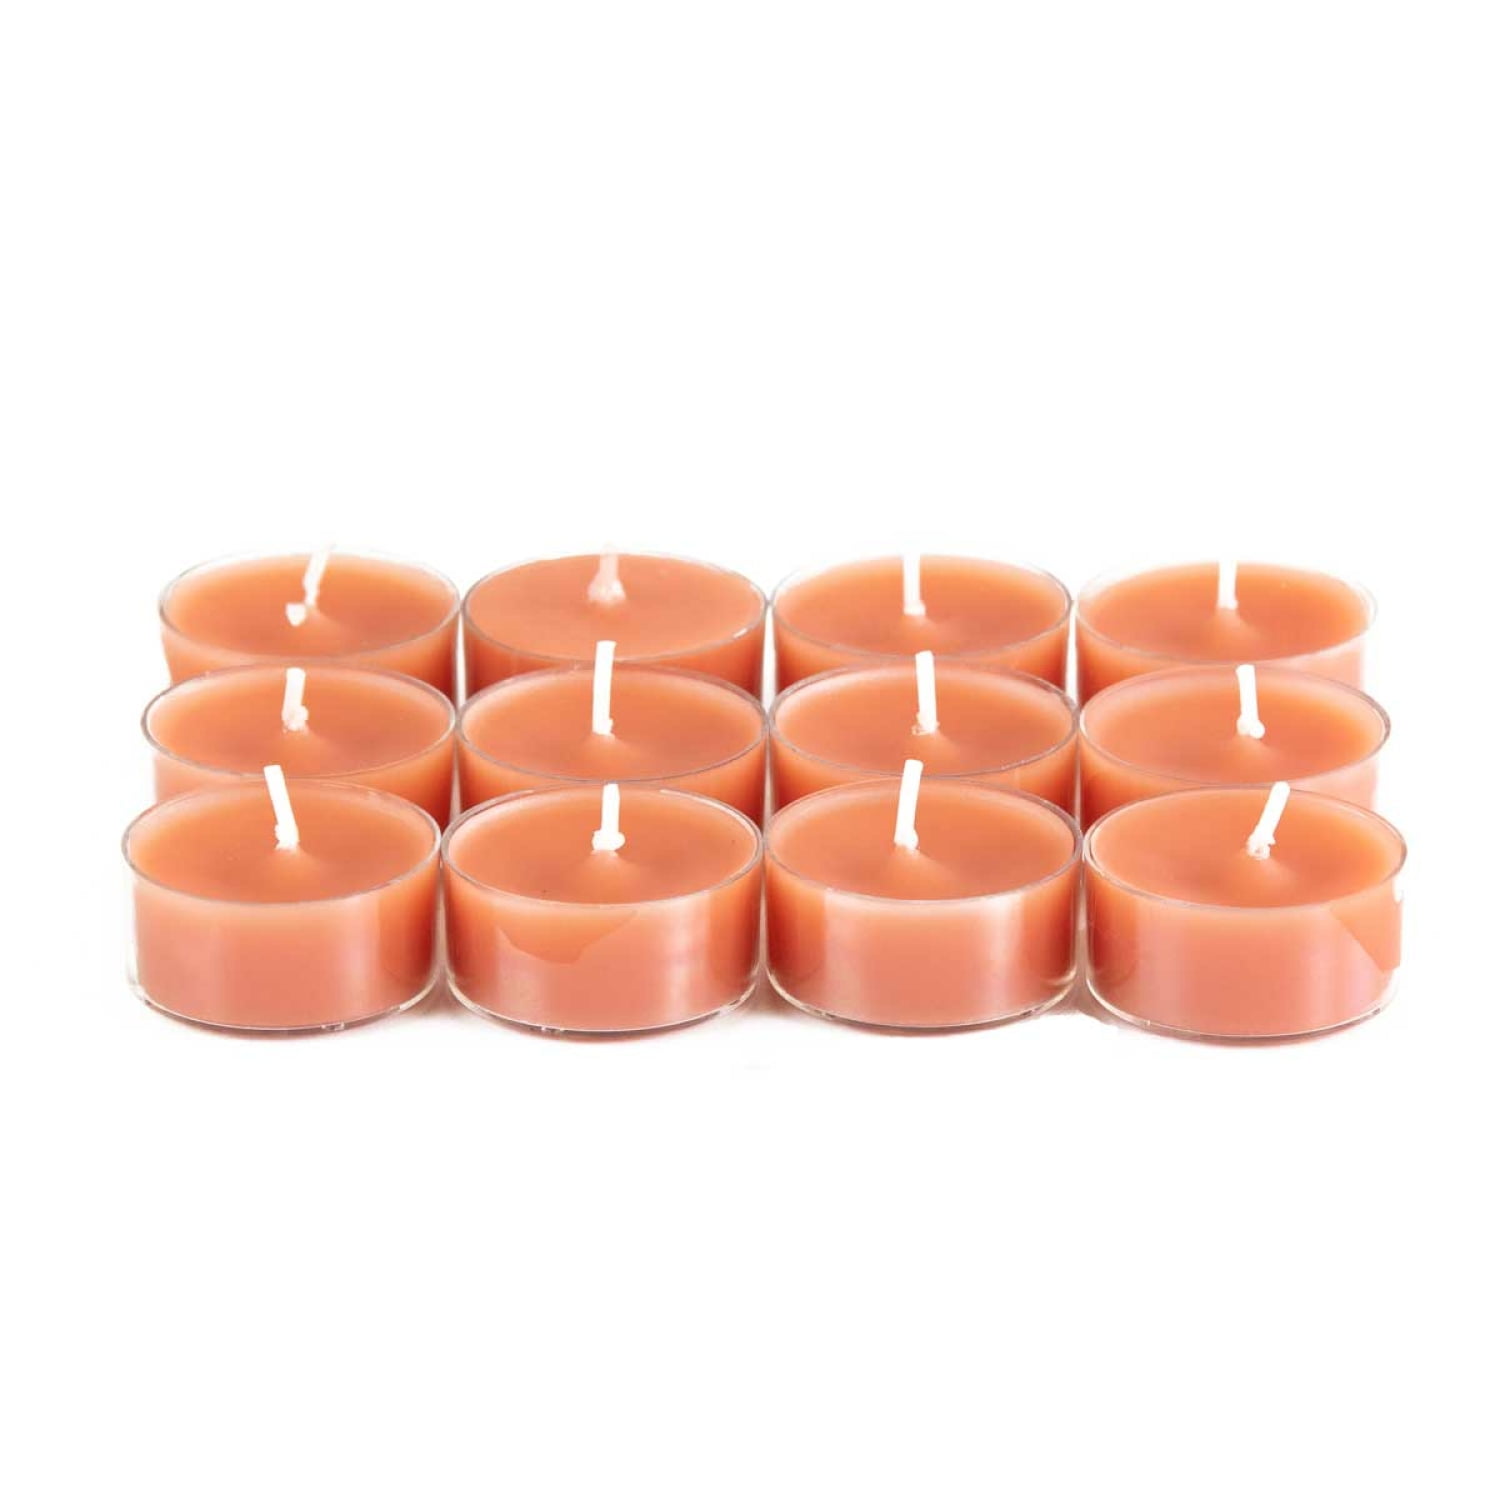 Partylite 2 boxes BALSAM SNOW Tealights low ship